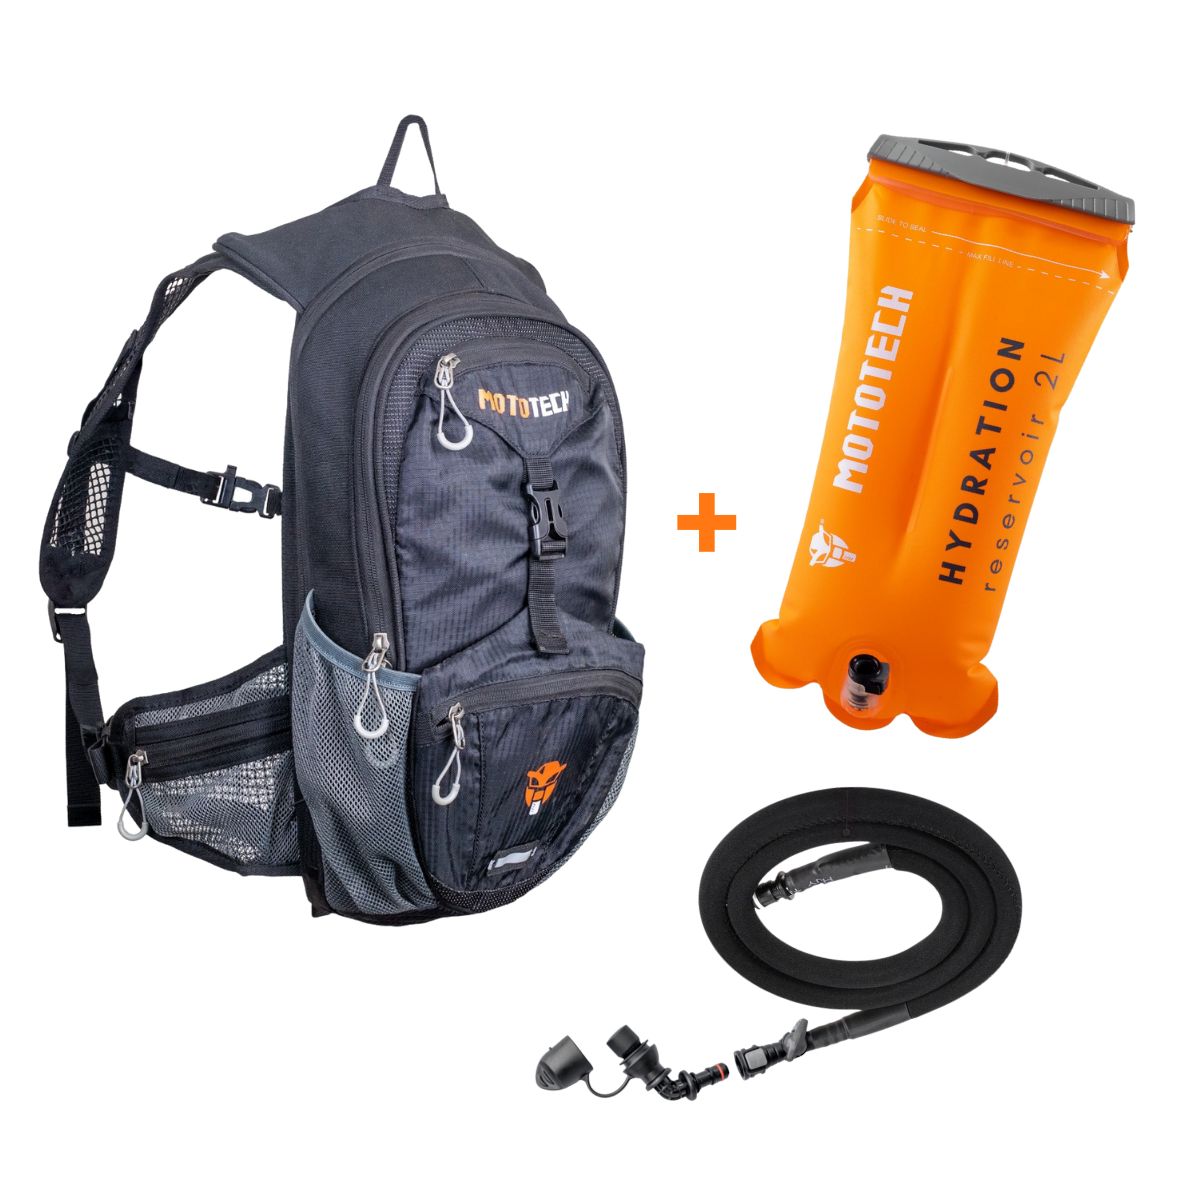 Hydration Reservoir Water Bladder - 2L + Stealth Hydration Backpack - 8L Combo 1